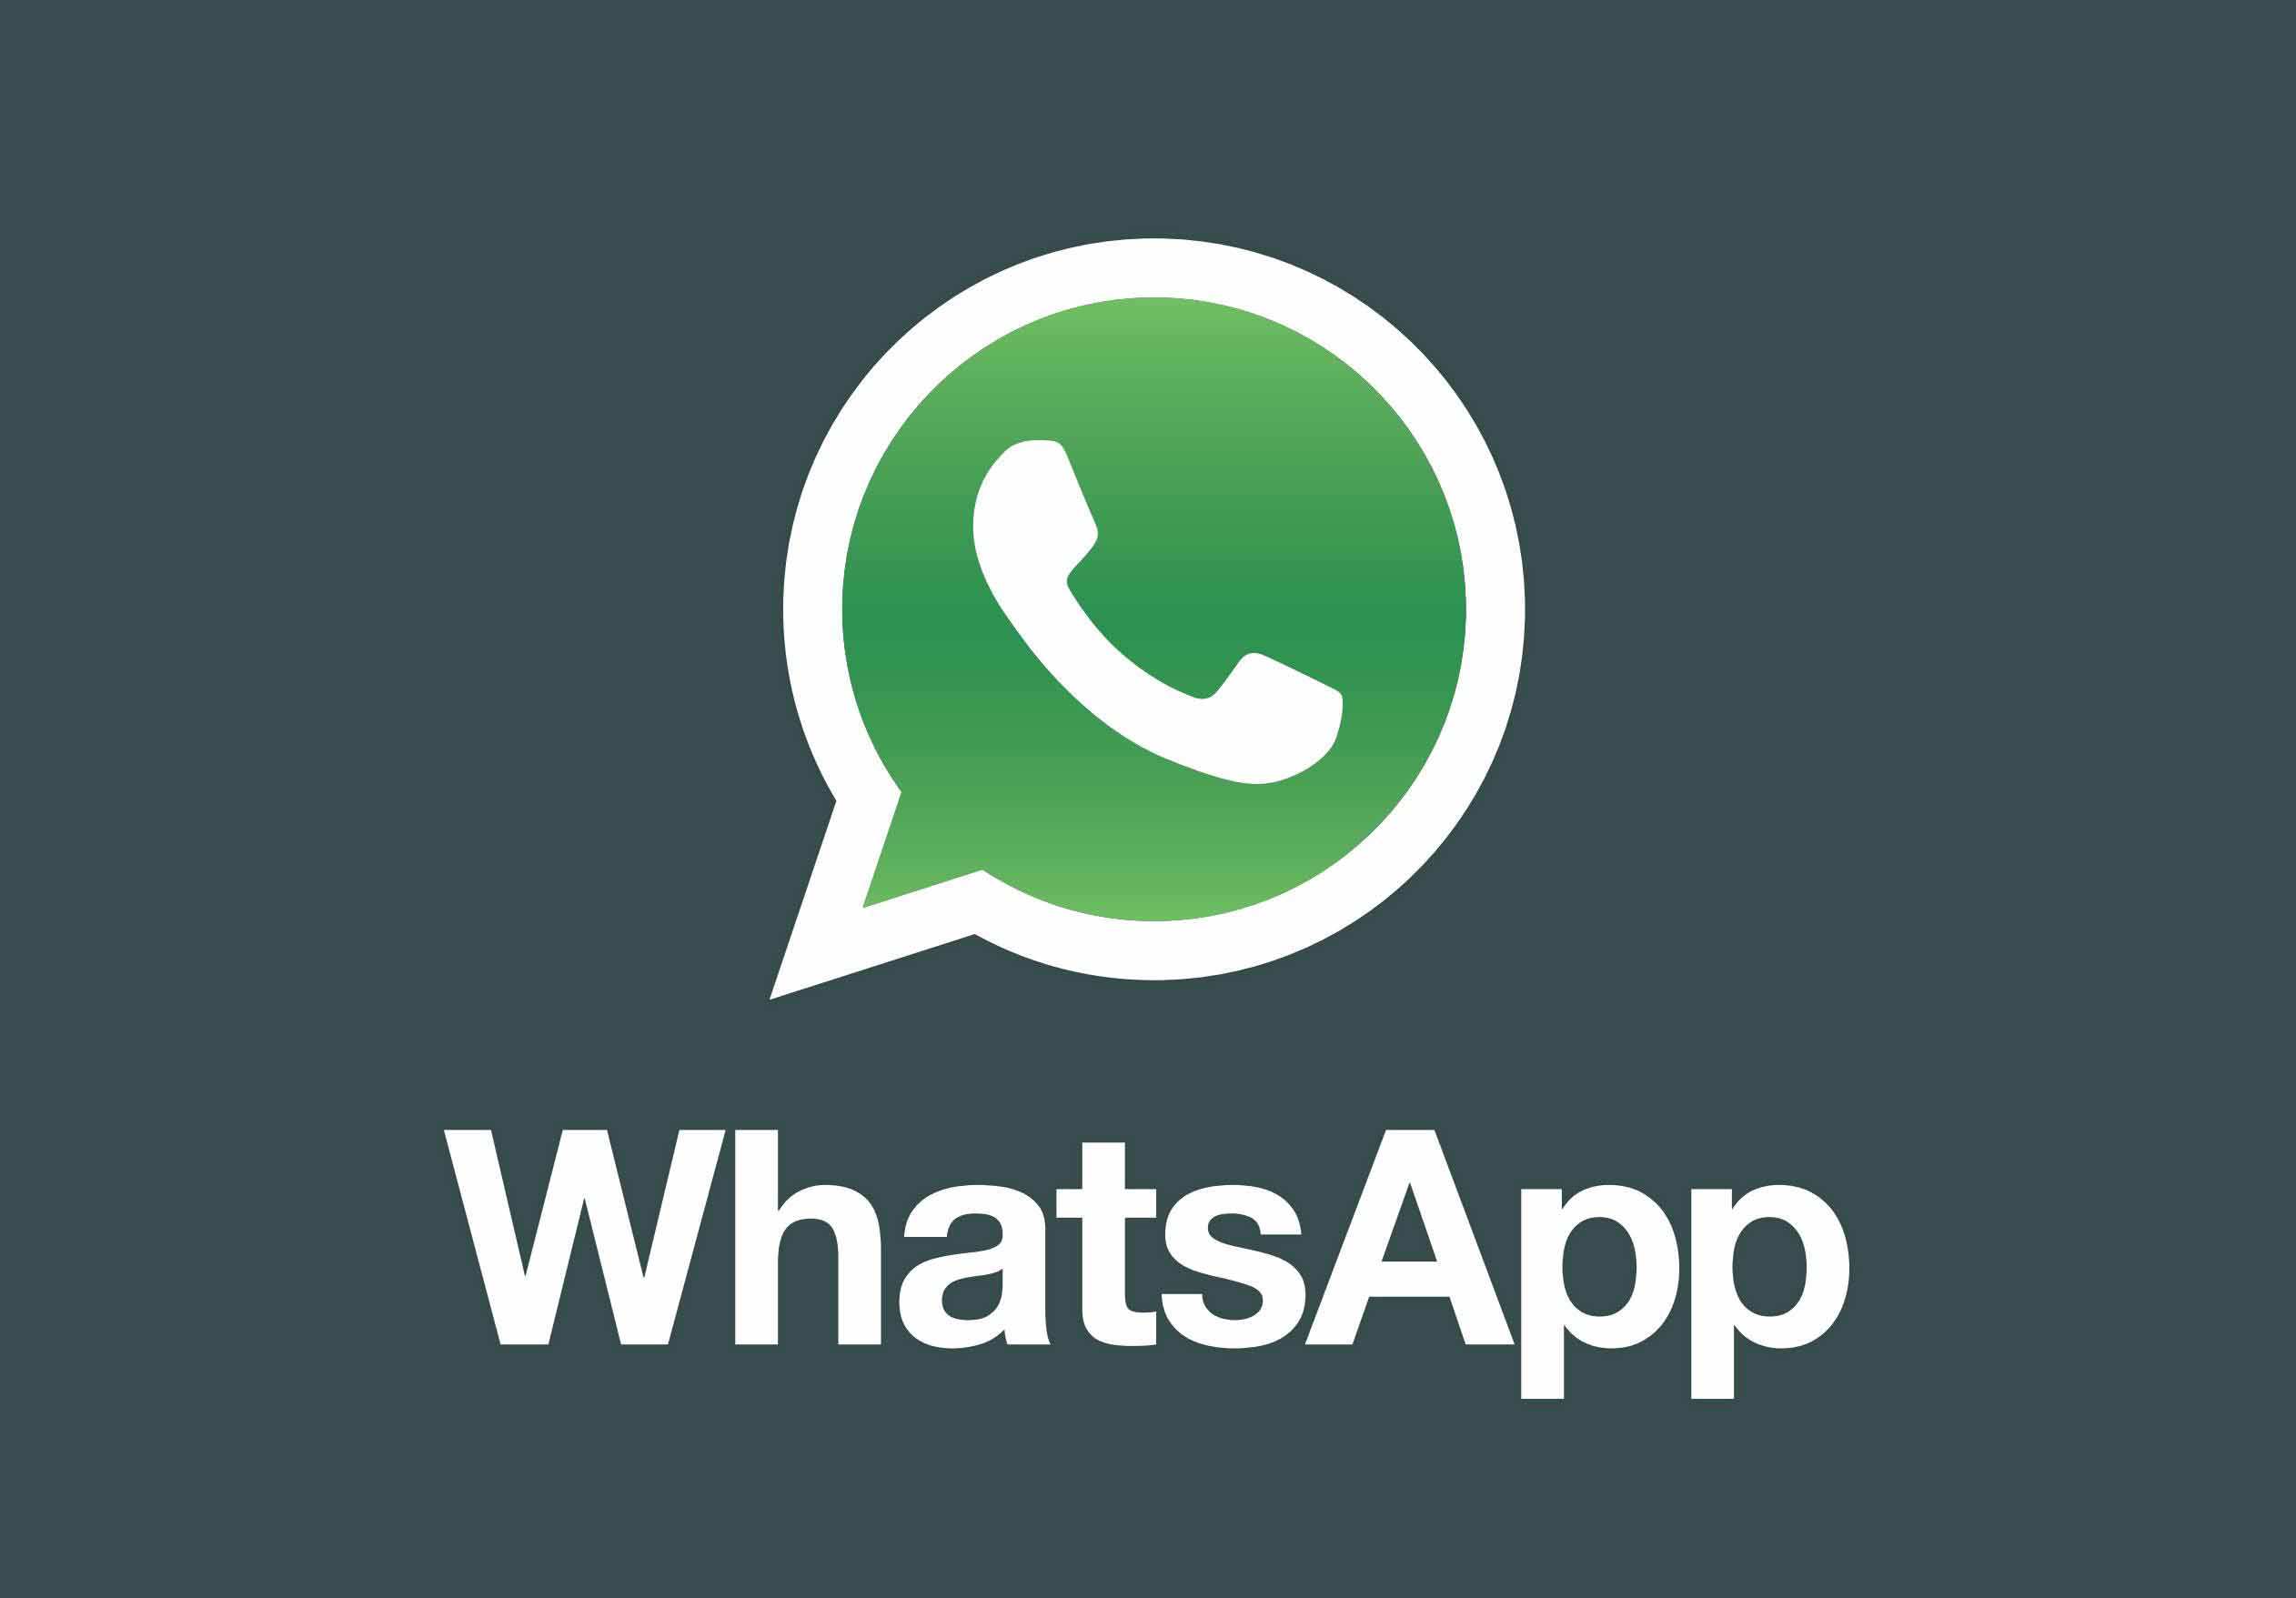 WhatsApp Download 2.16.263 Beta APK Now Available for Your Android device